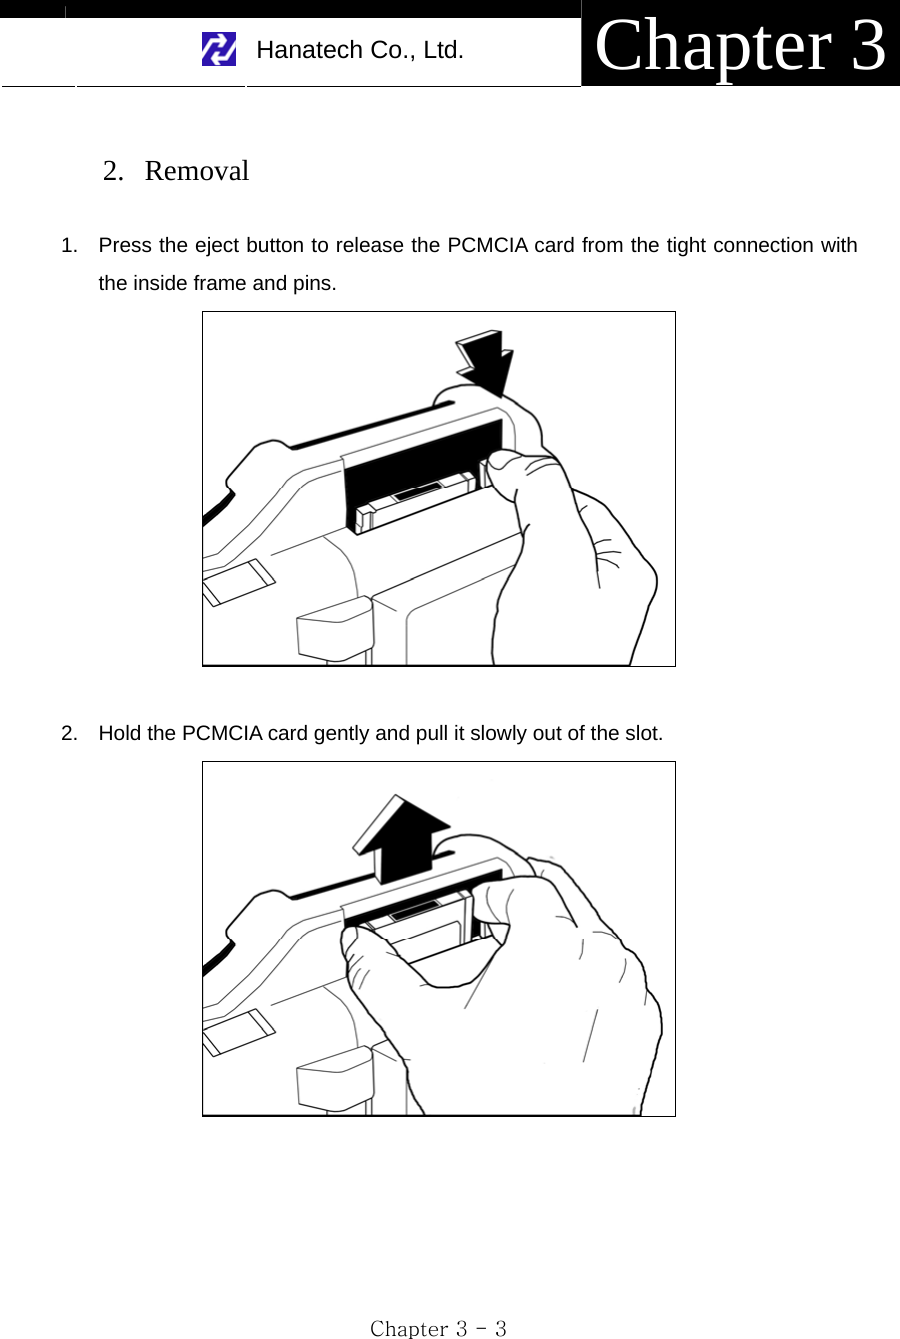     Hanatech Co., Ltd.  Chapter 3 Chapter 3 - 3  2. Removal  1.  Press the eject button to release the PCMCIA card from the tight connection with the inside frame and pins.   2.  Hold the PCMCIA card gently and pull it slowly out of the slot.   